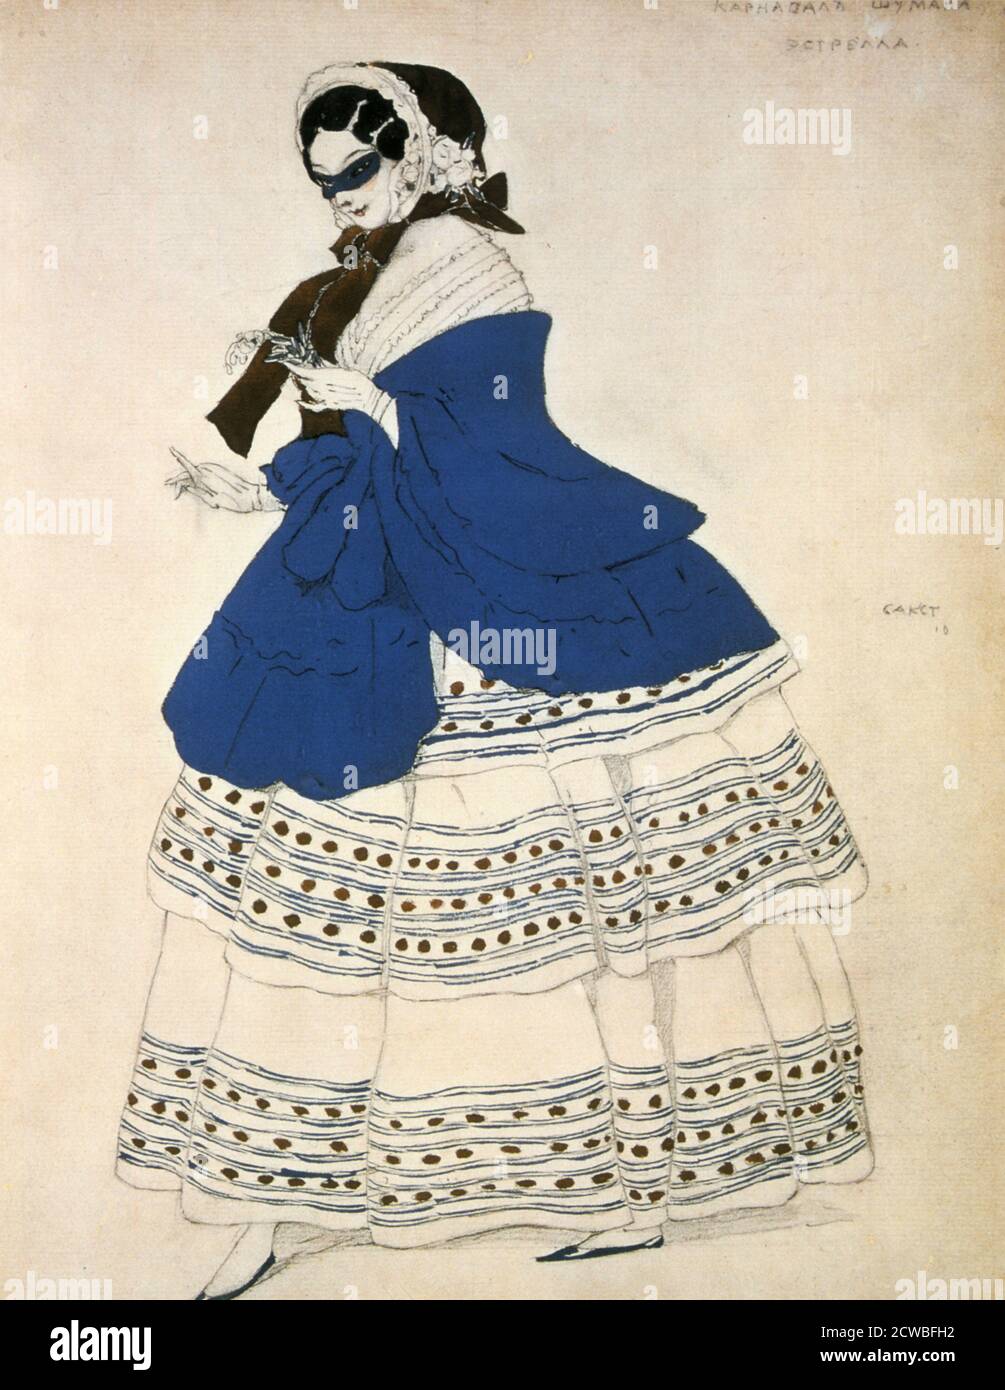 Estrella, design for a costume for the ballet Carnival by Leon Bakst, composed by Robert Schumann, 1919. From the Hermitage Museum, St Petersburg, Russia. Stock Photo